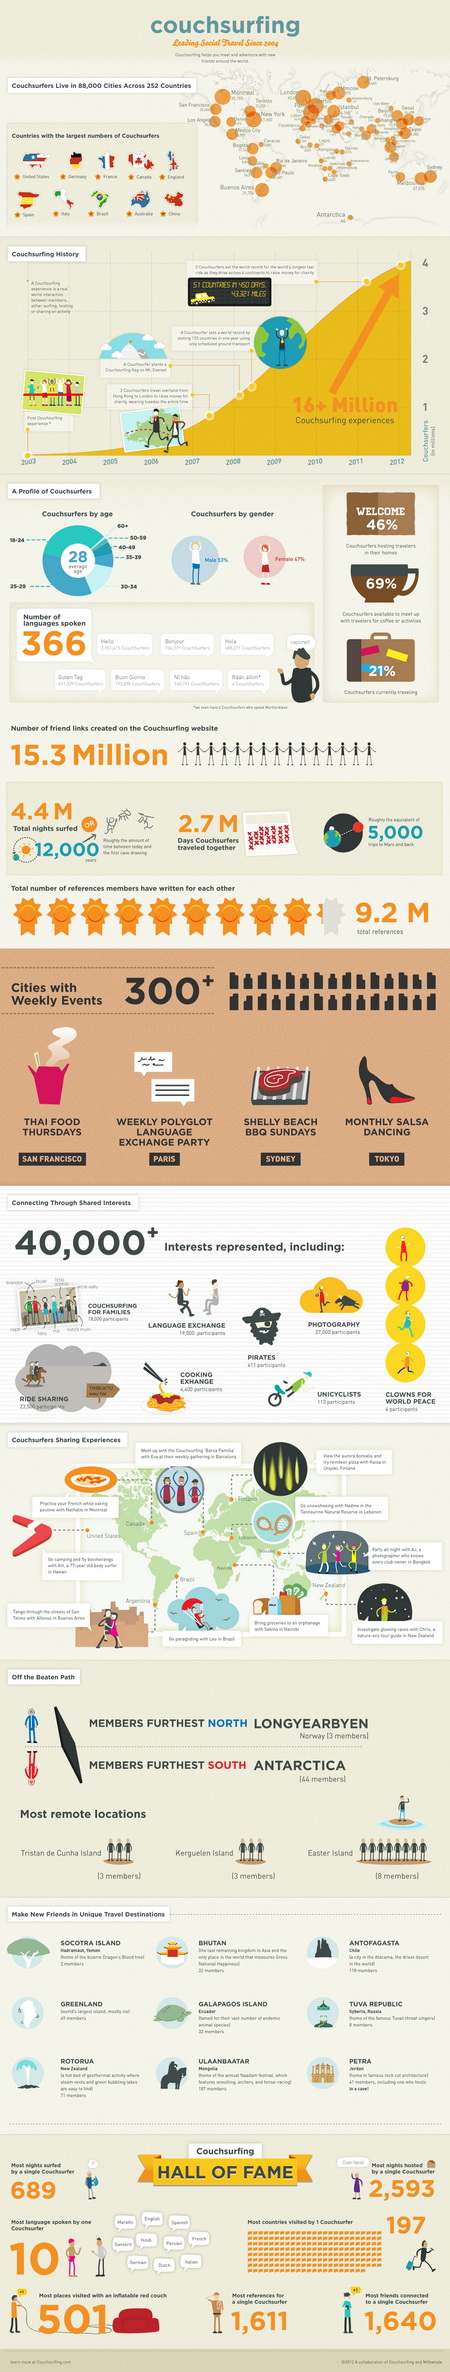 Thumbnail for CouchSurfing Facts Infographic